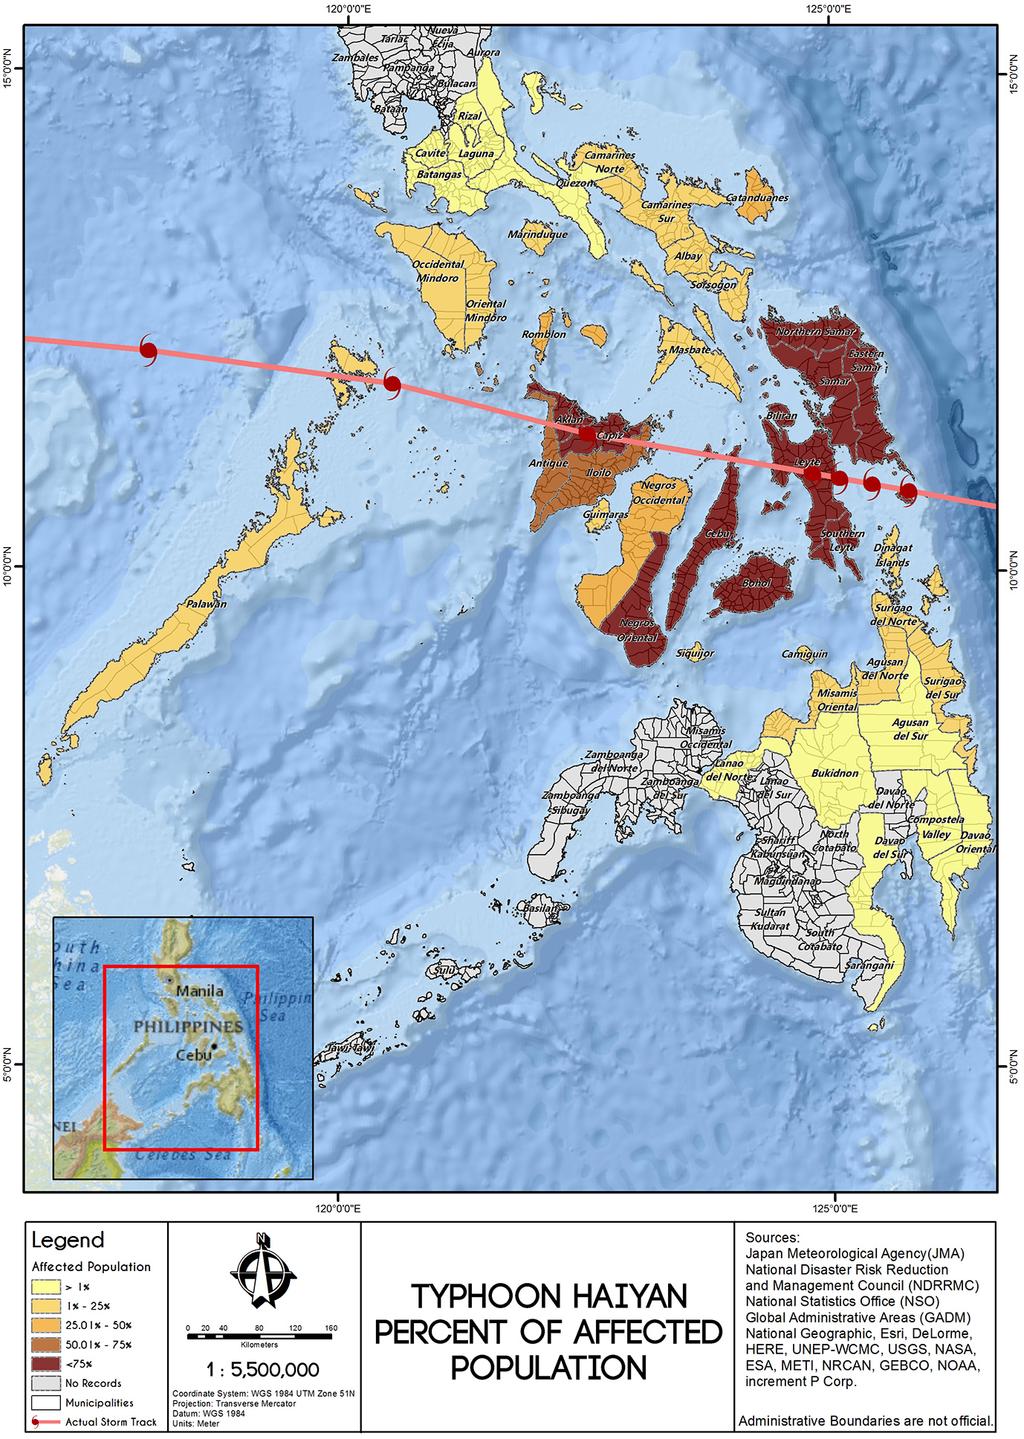 559 Figure 1. Typhoon Haiyan: percent of affected population (Project NOAH). The bathymetric data used were 2 min gridded elevation data (ETOPO2).